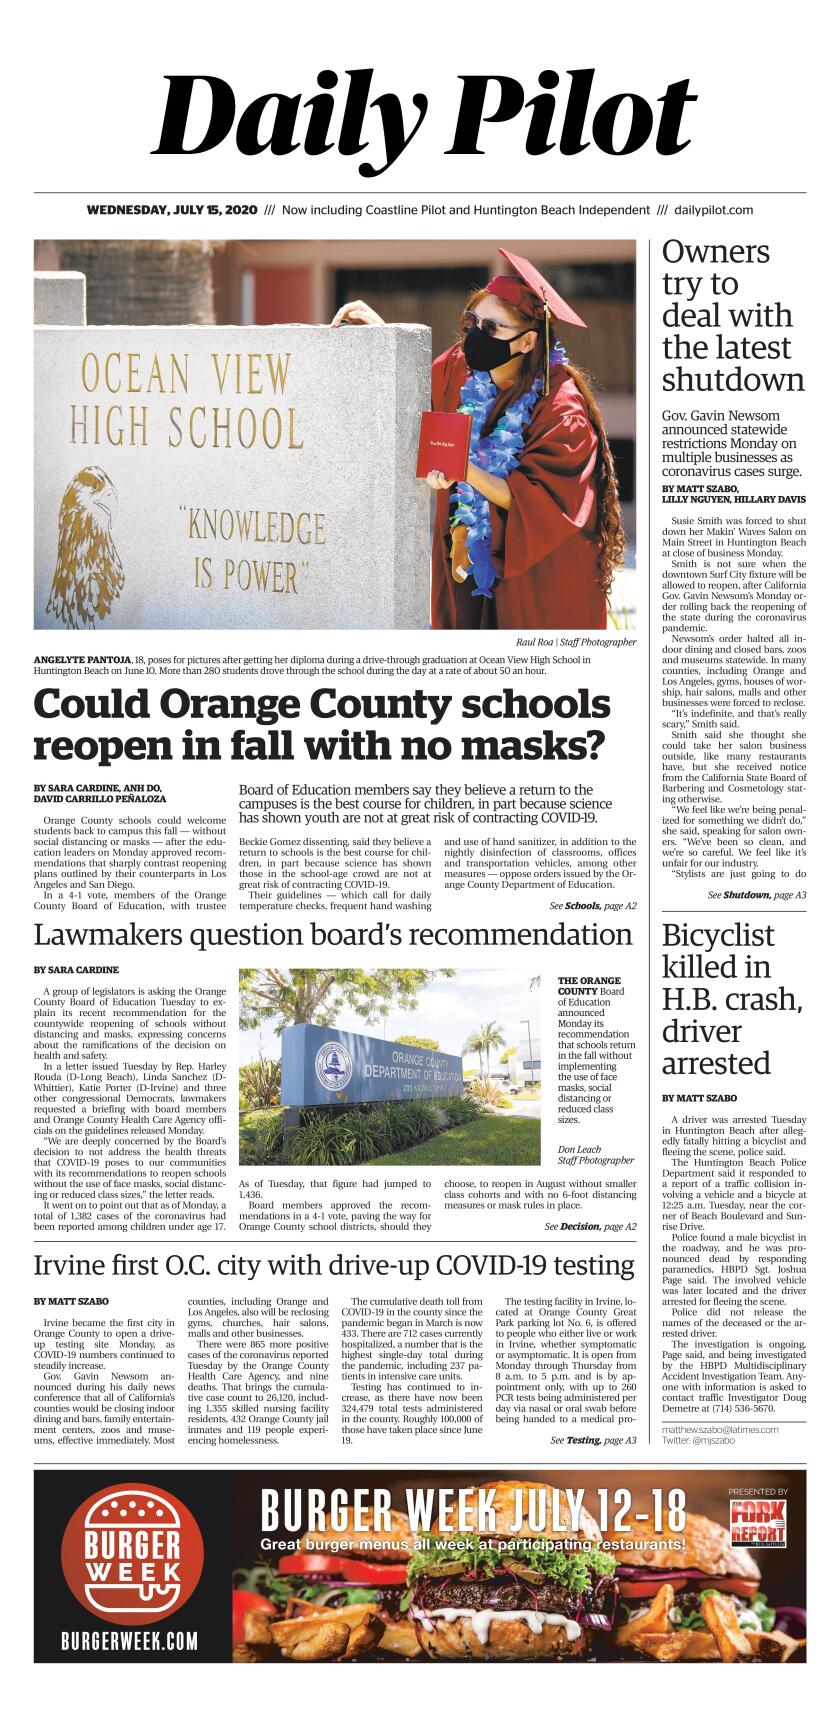 Daily Pilot e-Newspaper: Wednesday, July 15, 2020 - Los Angeles Times